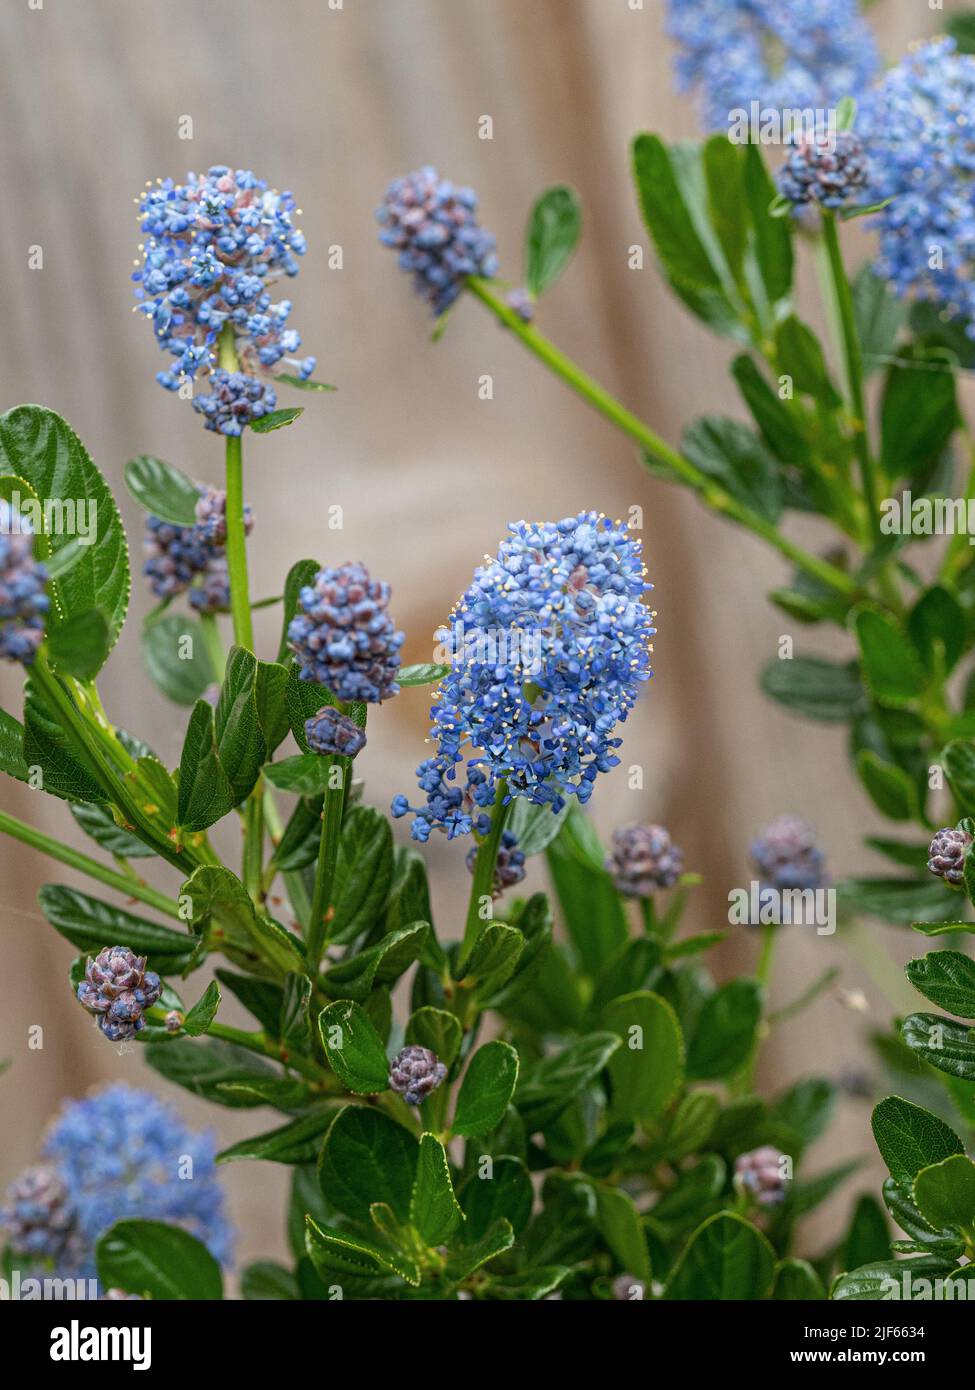 A close up of a sky blue flowers spike of Ceanothus impressus 'Victoria' Stock Photo